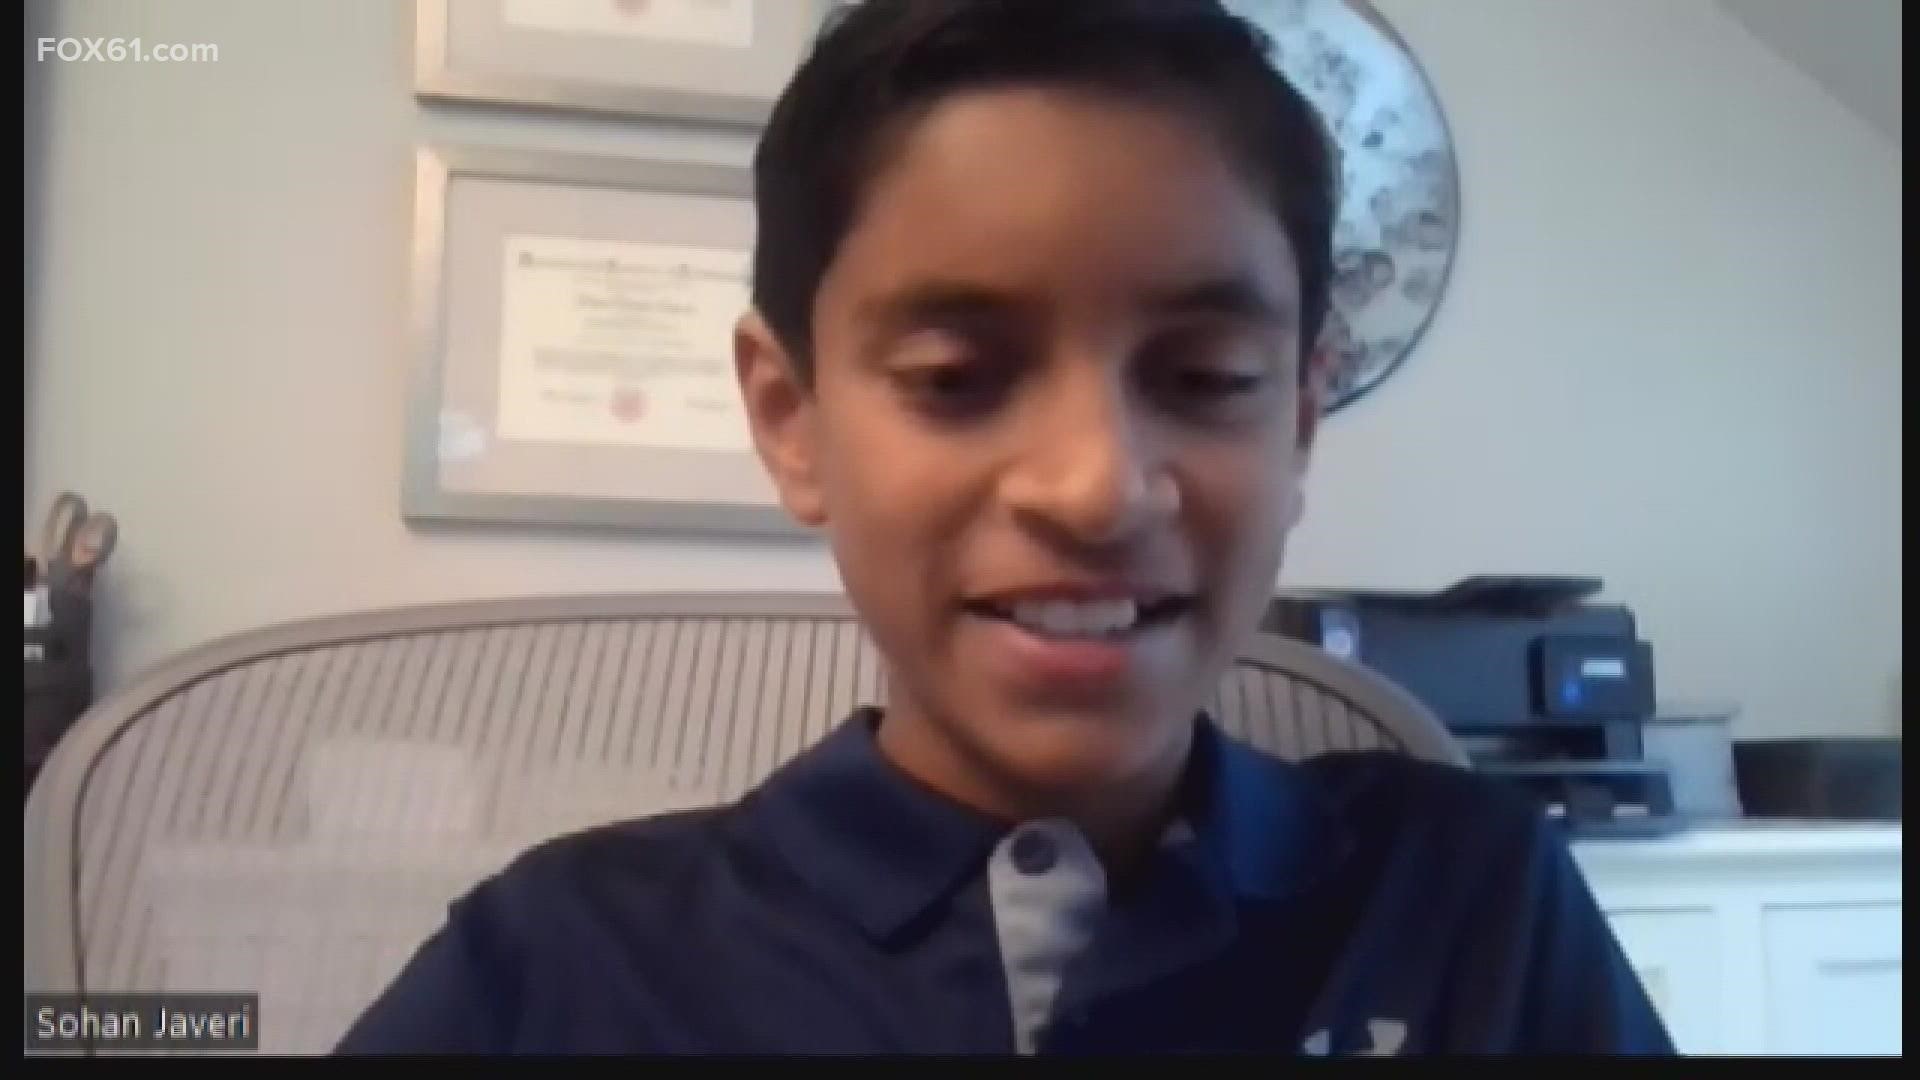 The 12-year-old has also launched an online math tutoring company called Wise Owl Tutoring.